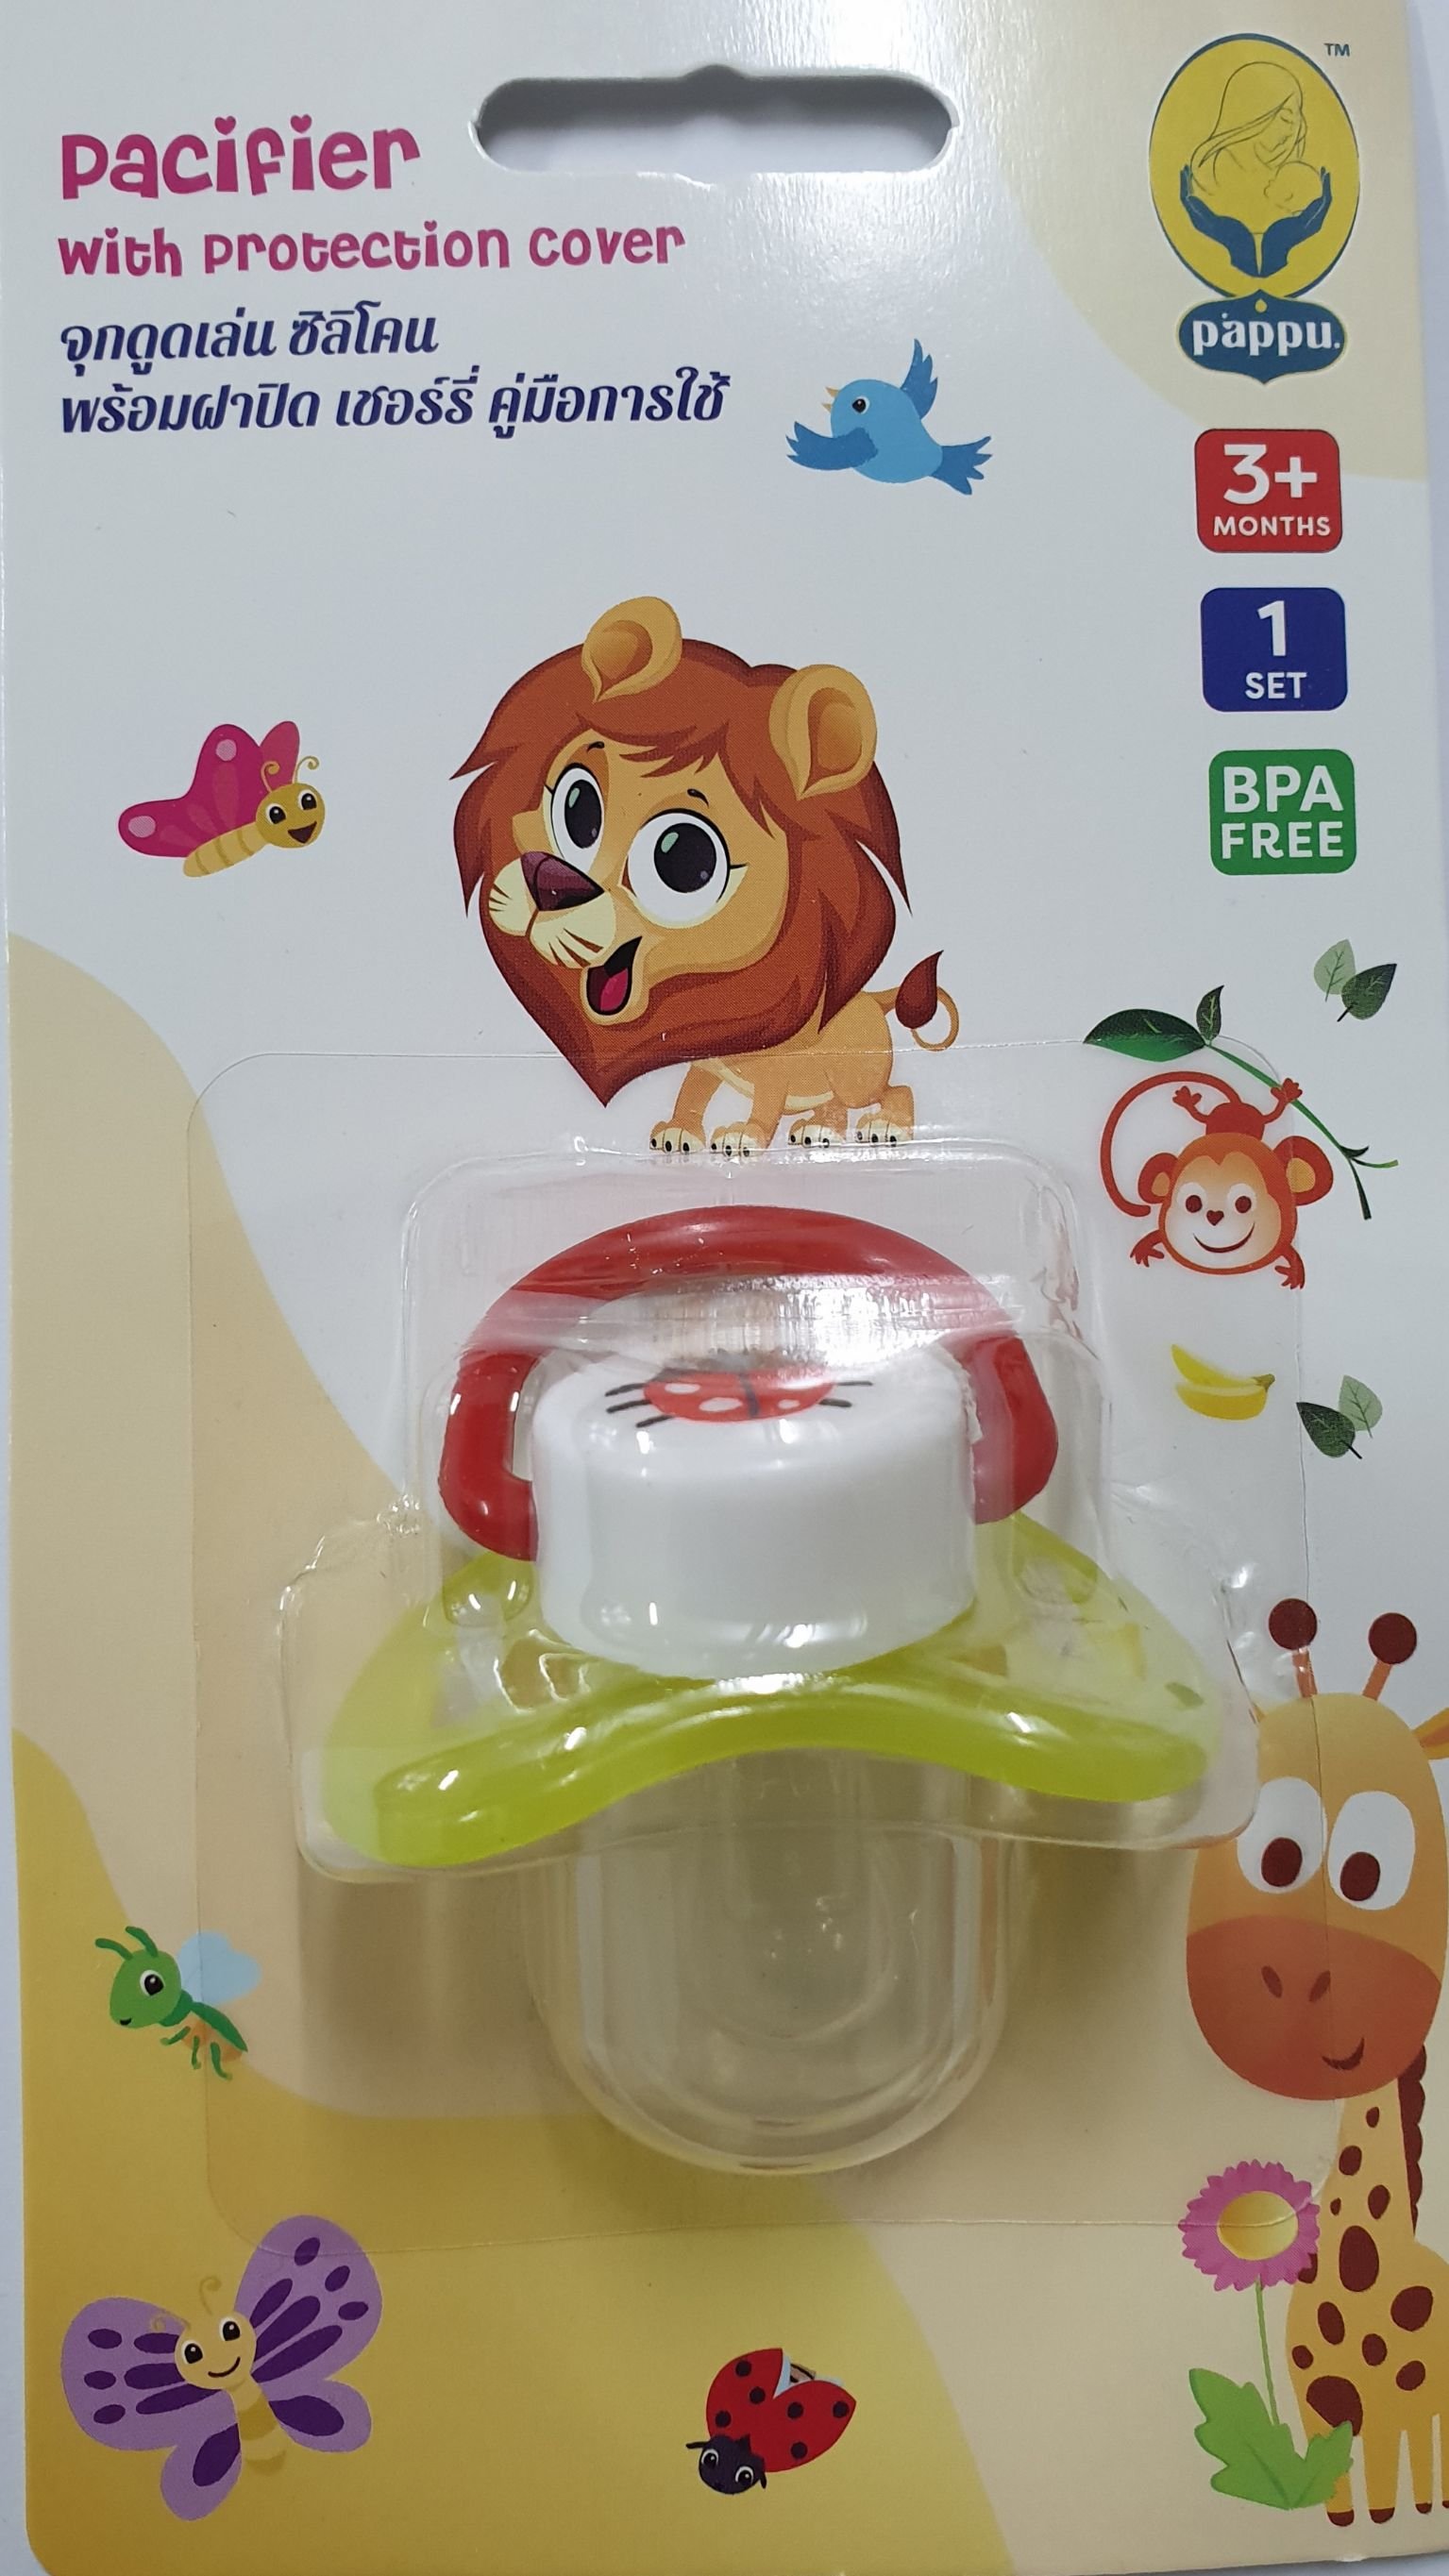 Pacifier with protection cover